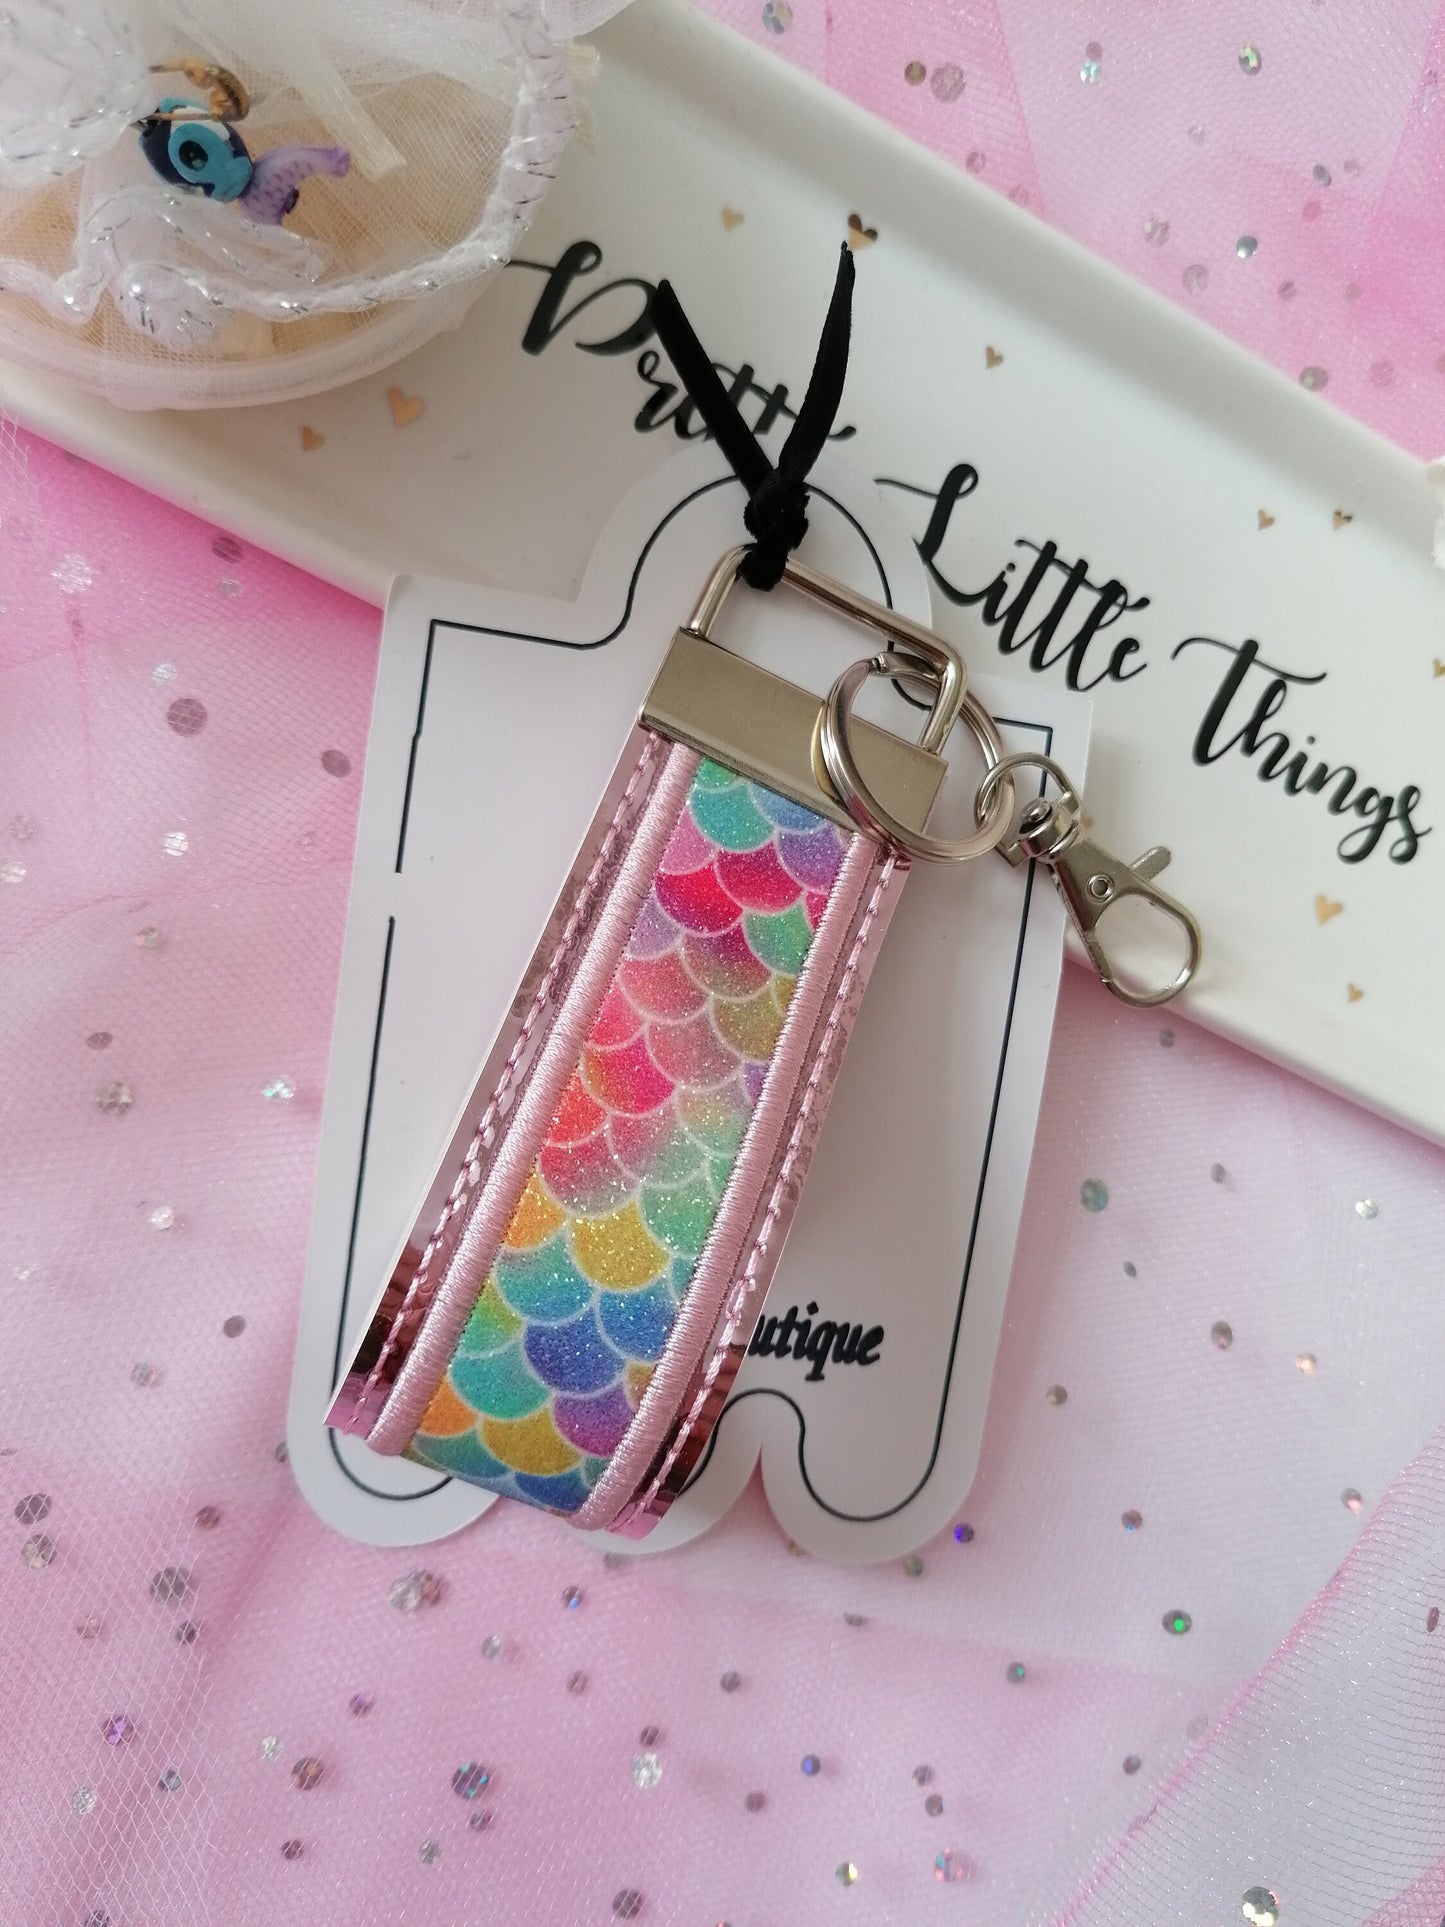 Embroidered Pink Key Fob Wristlet, Holographic Key Fob,Mermaid Design, Embroidered Key Chain, Embroidered Key Fob, Wristlet Key Chain